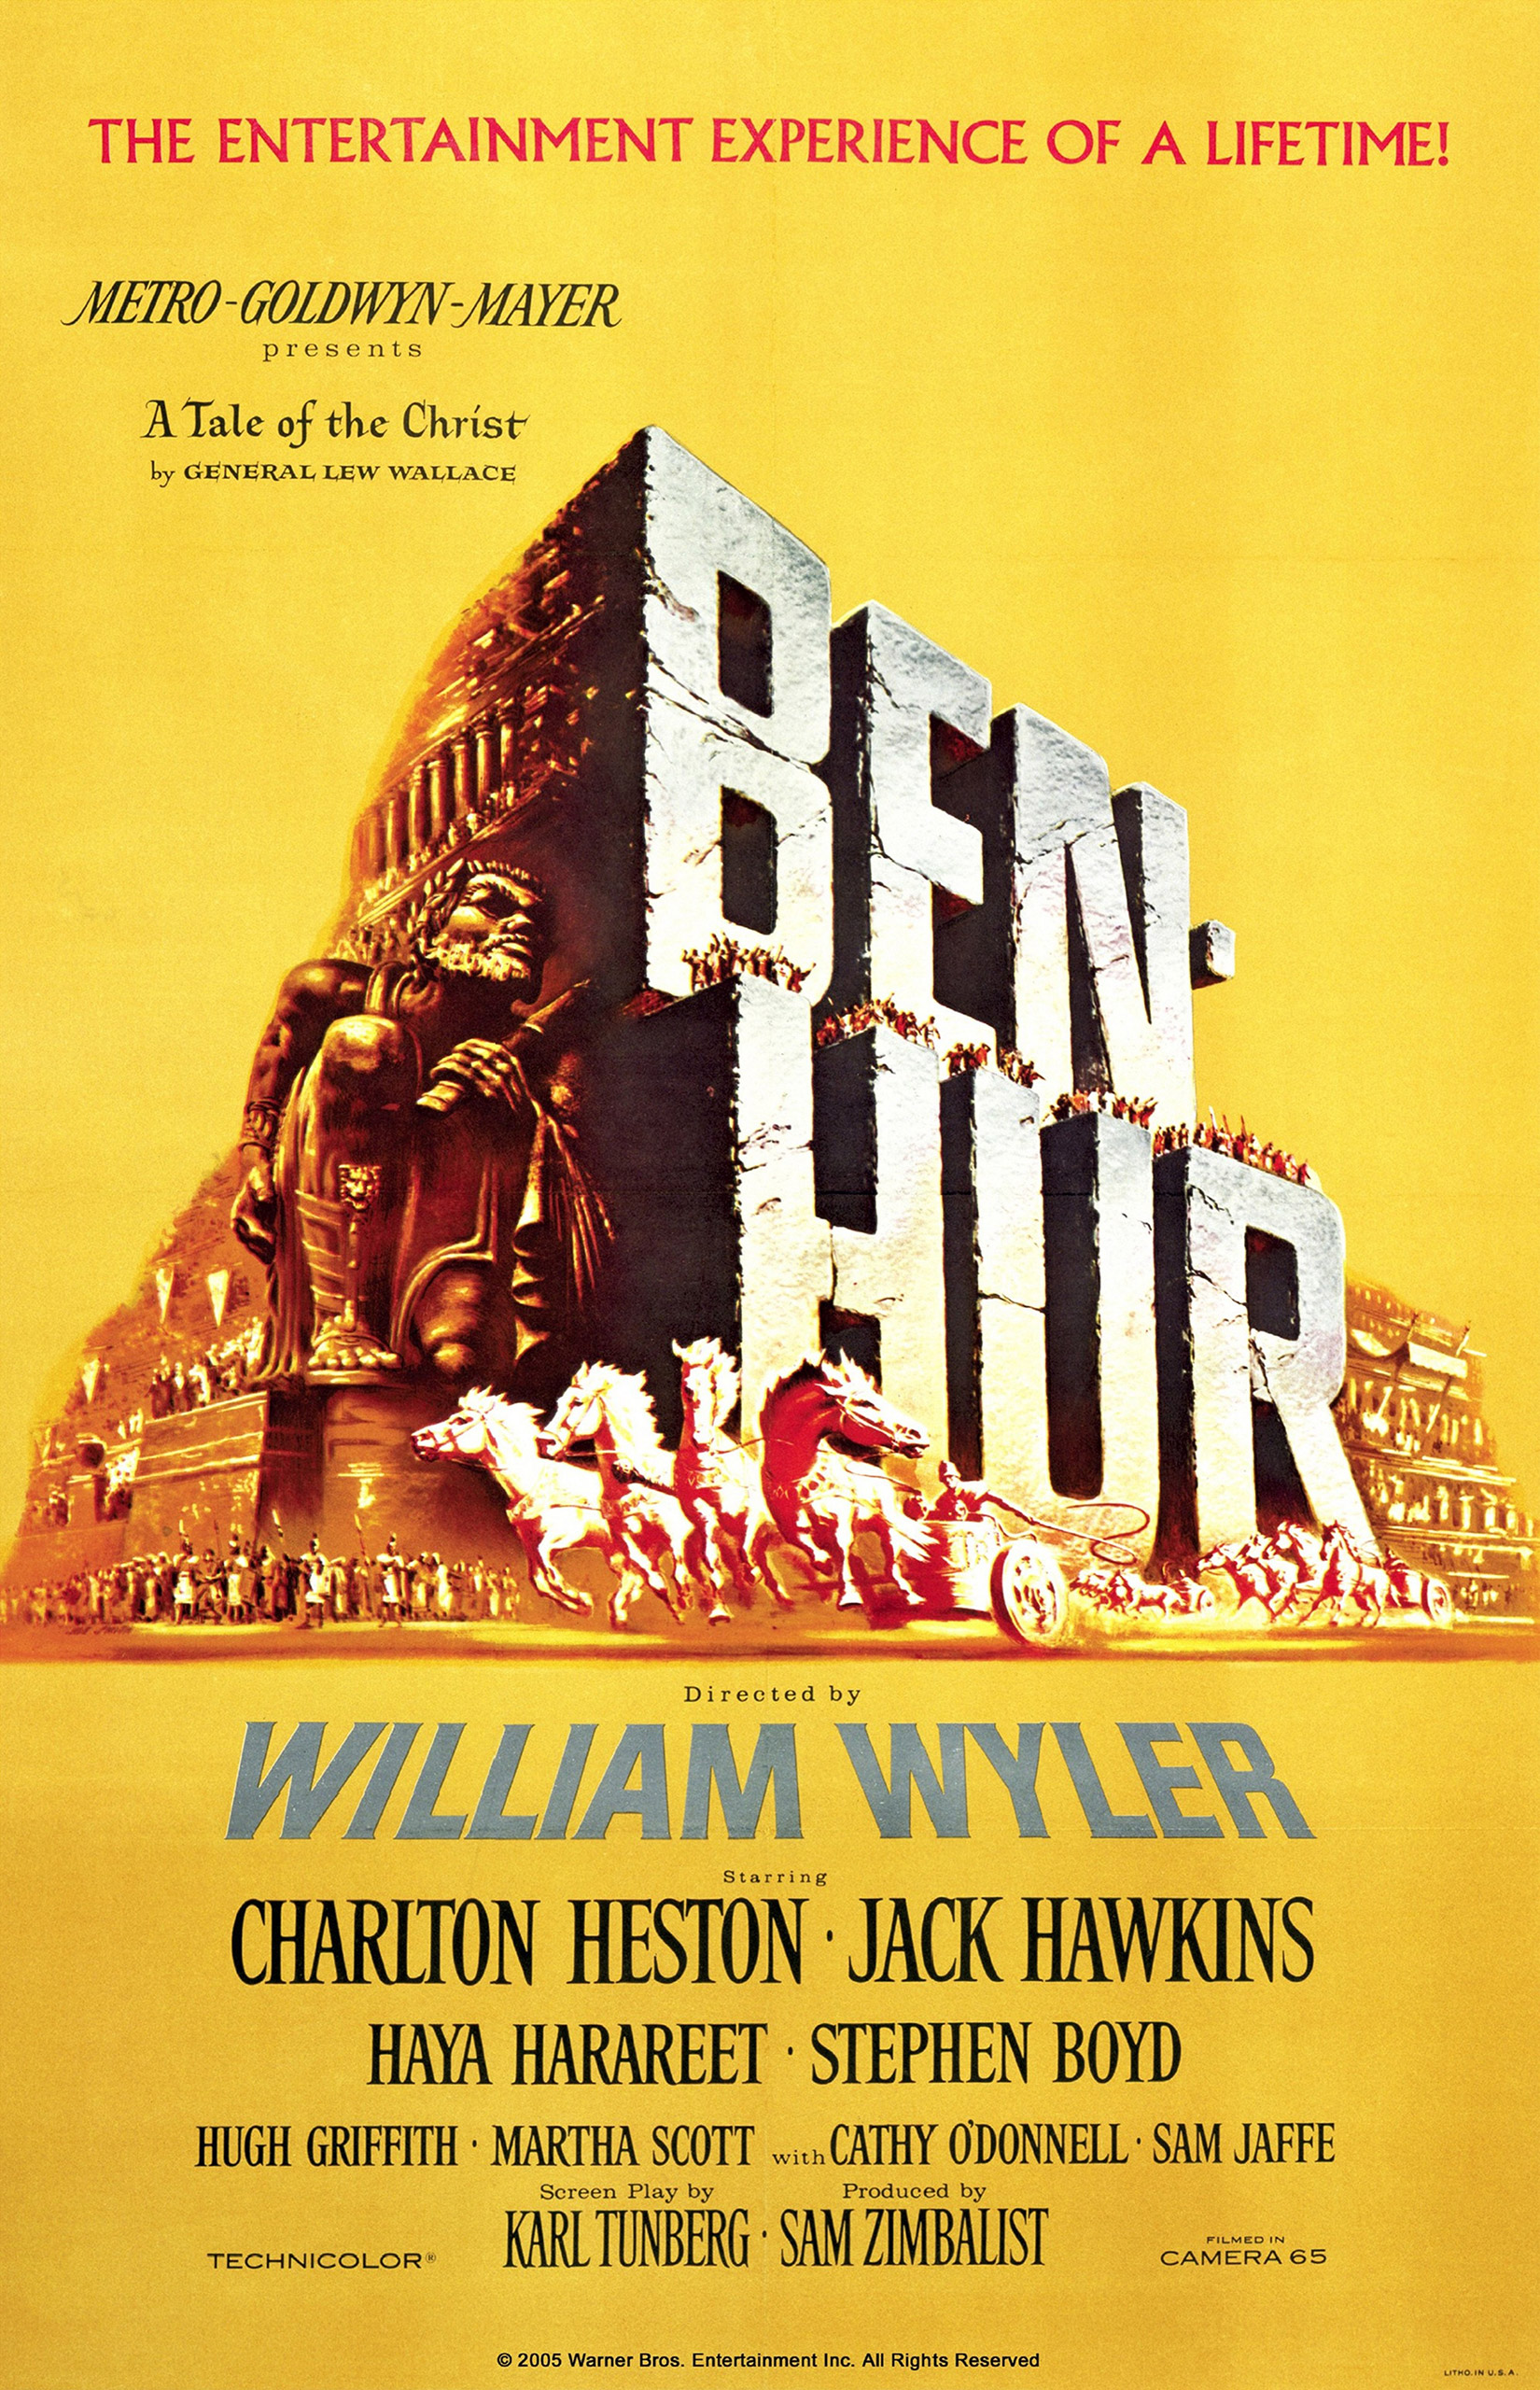 1959 Ben Hur poster. (Universal History Archive/UIG—Getty Images)